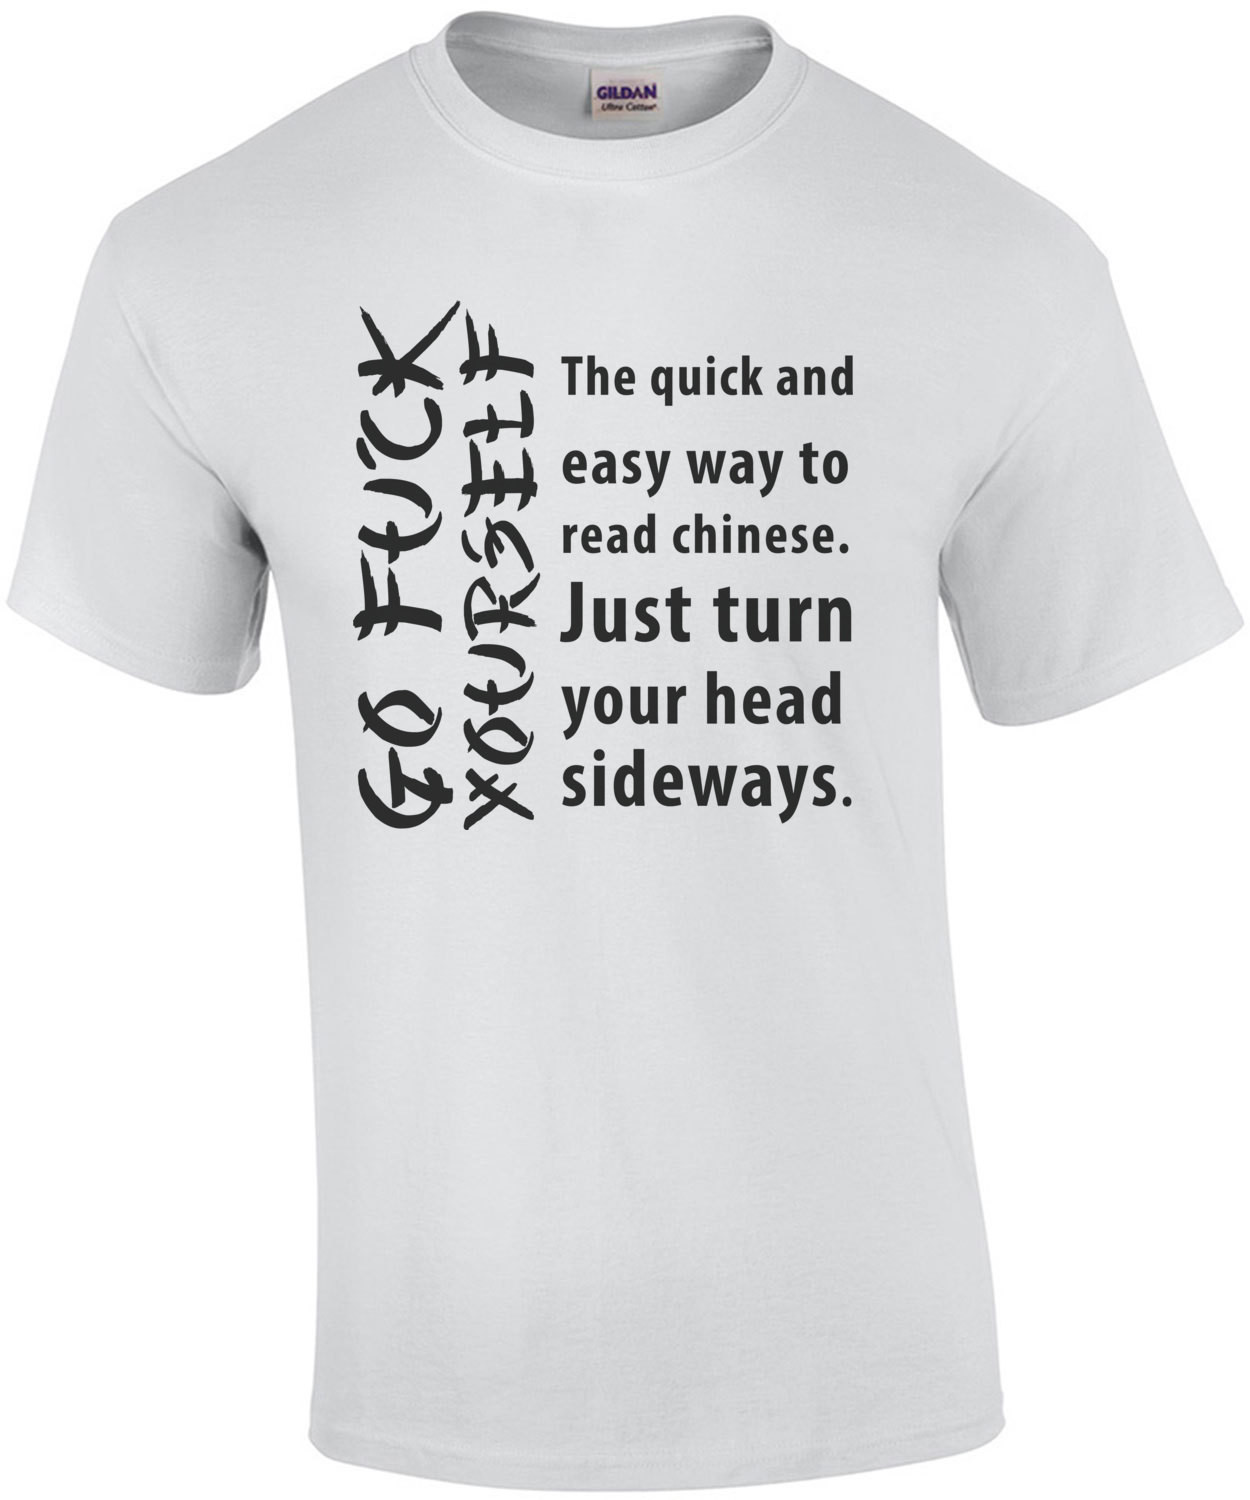 Quick easy way to read chinese. Turn head sideways - go fuck yourself - funny t-shirt